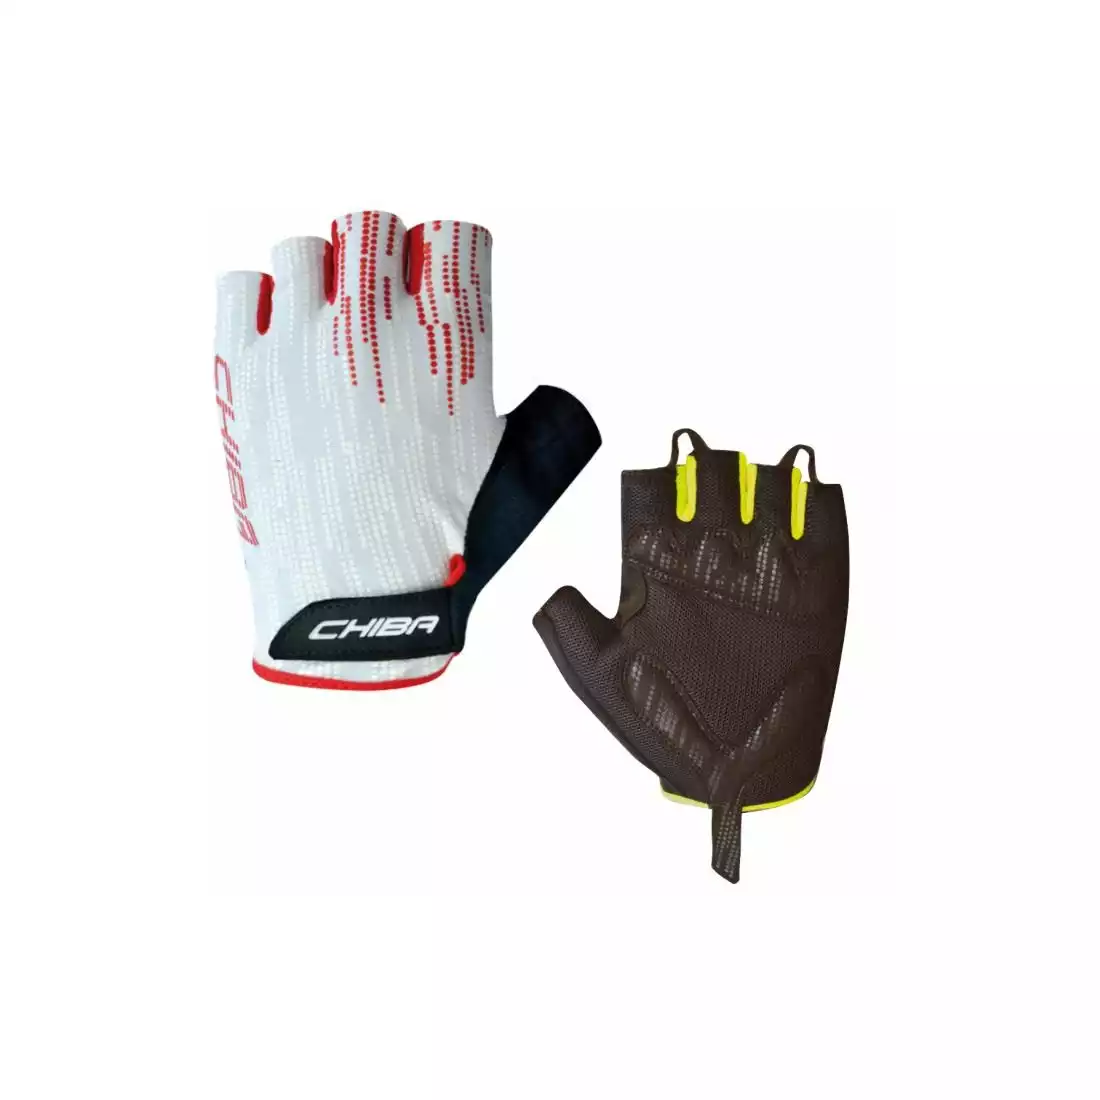 CHIBA ROAD PLUS Cycling gloves, white and red